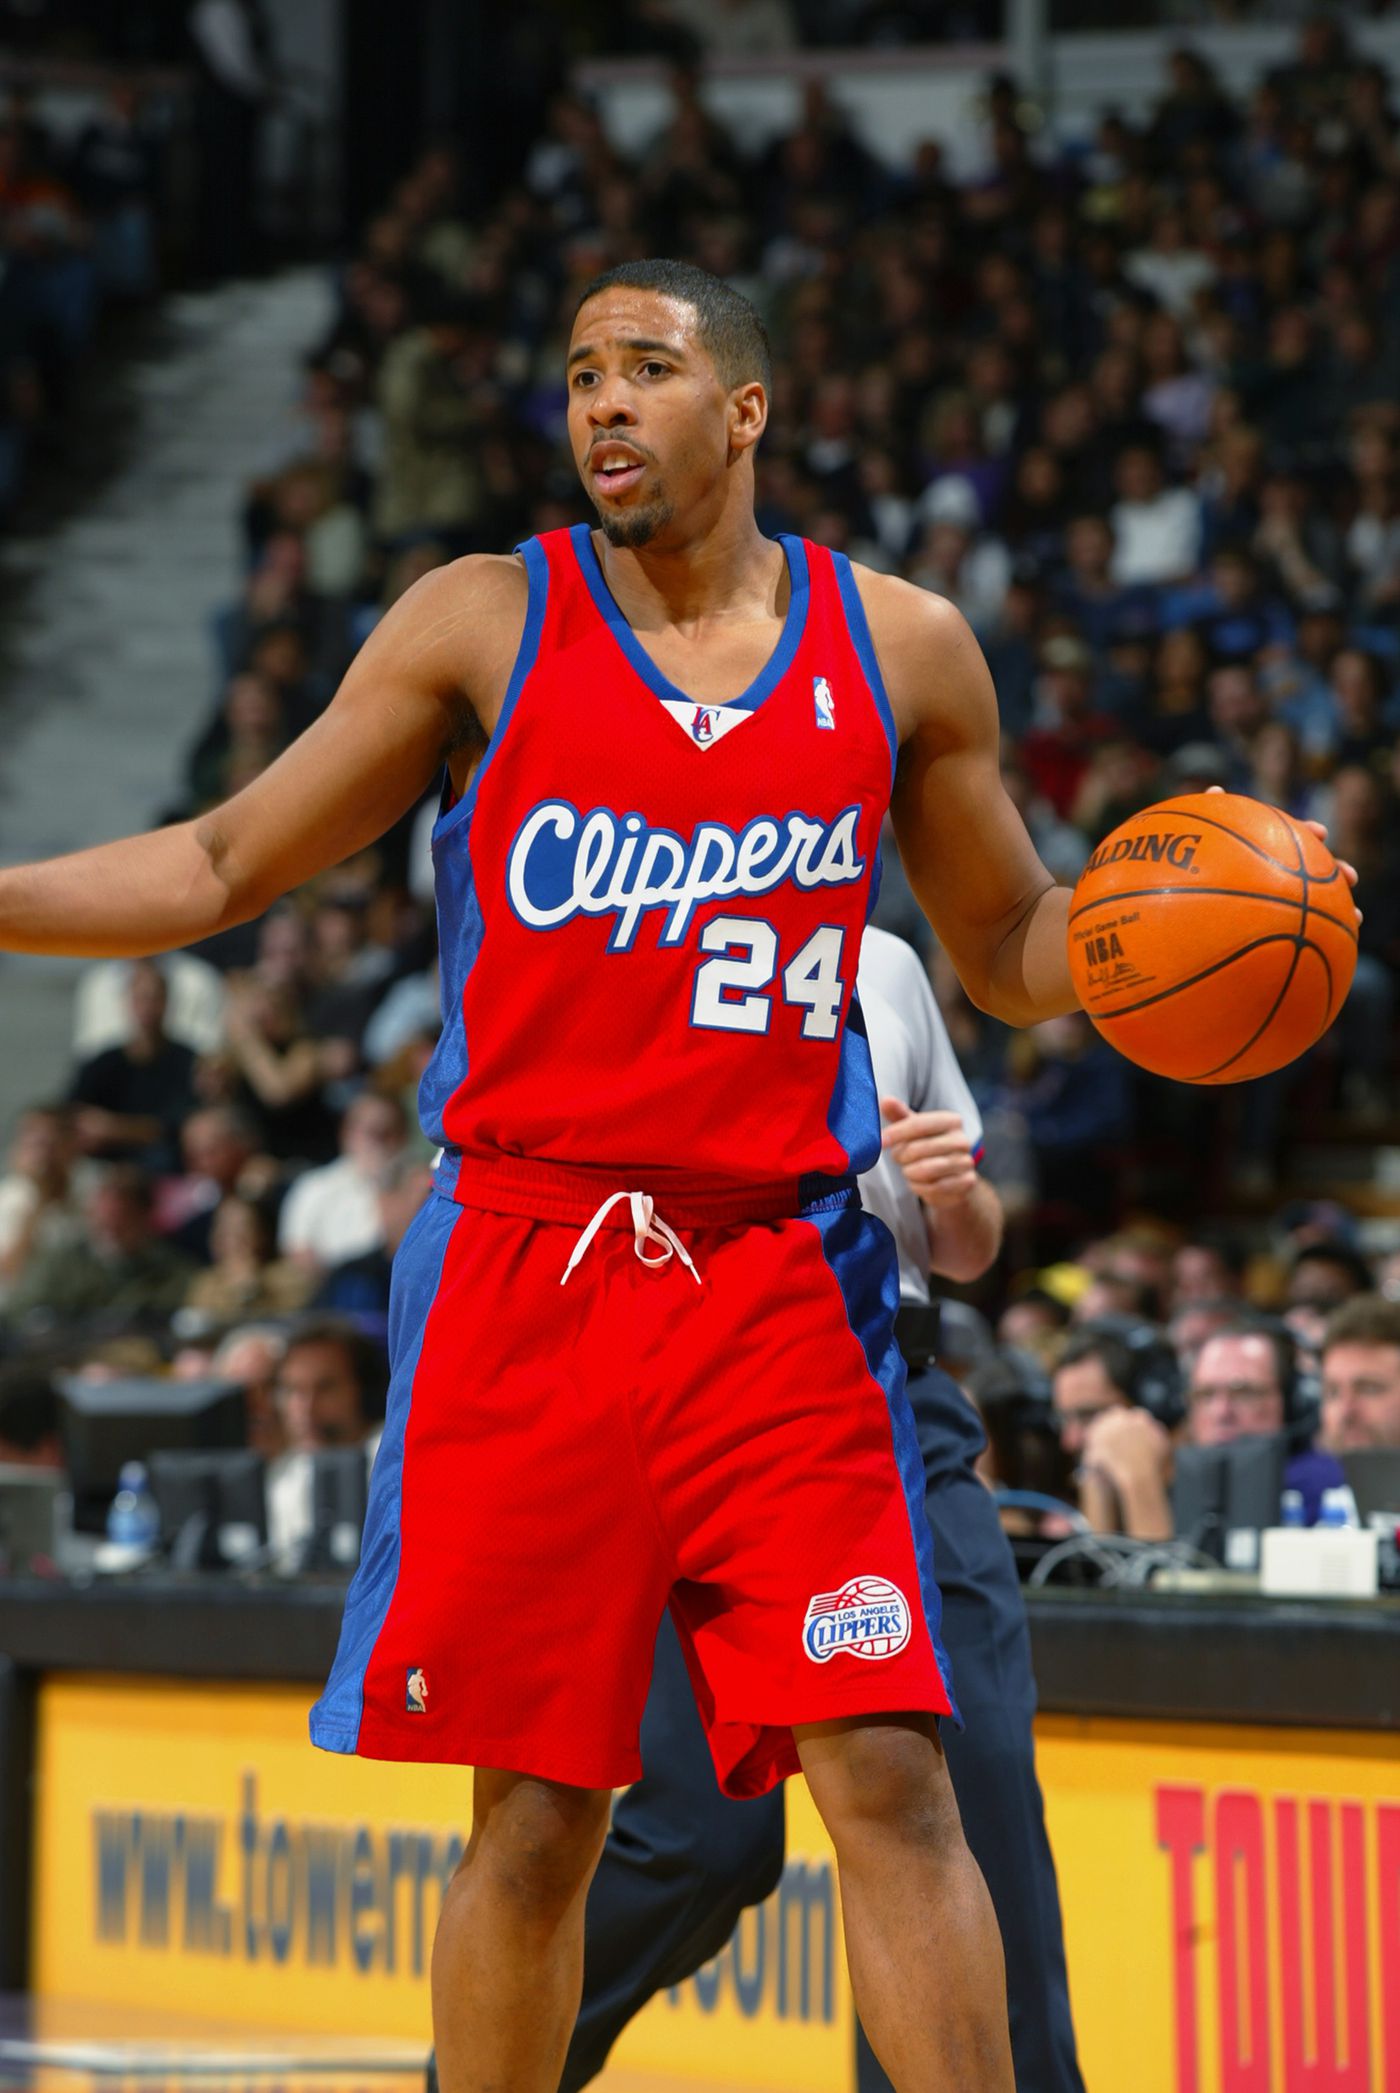 Andre Miller playing for Clippers.